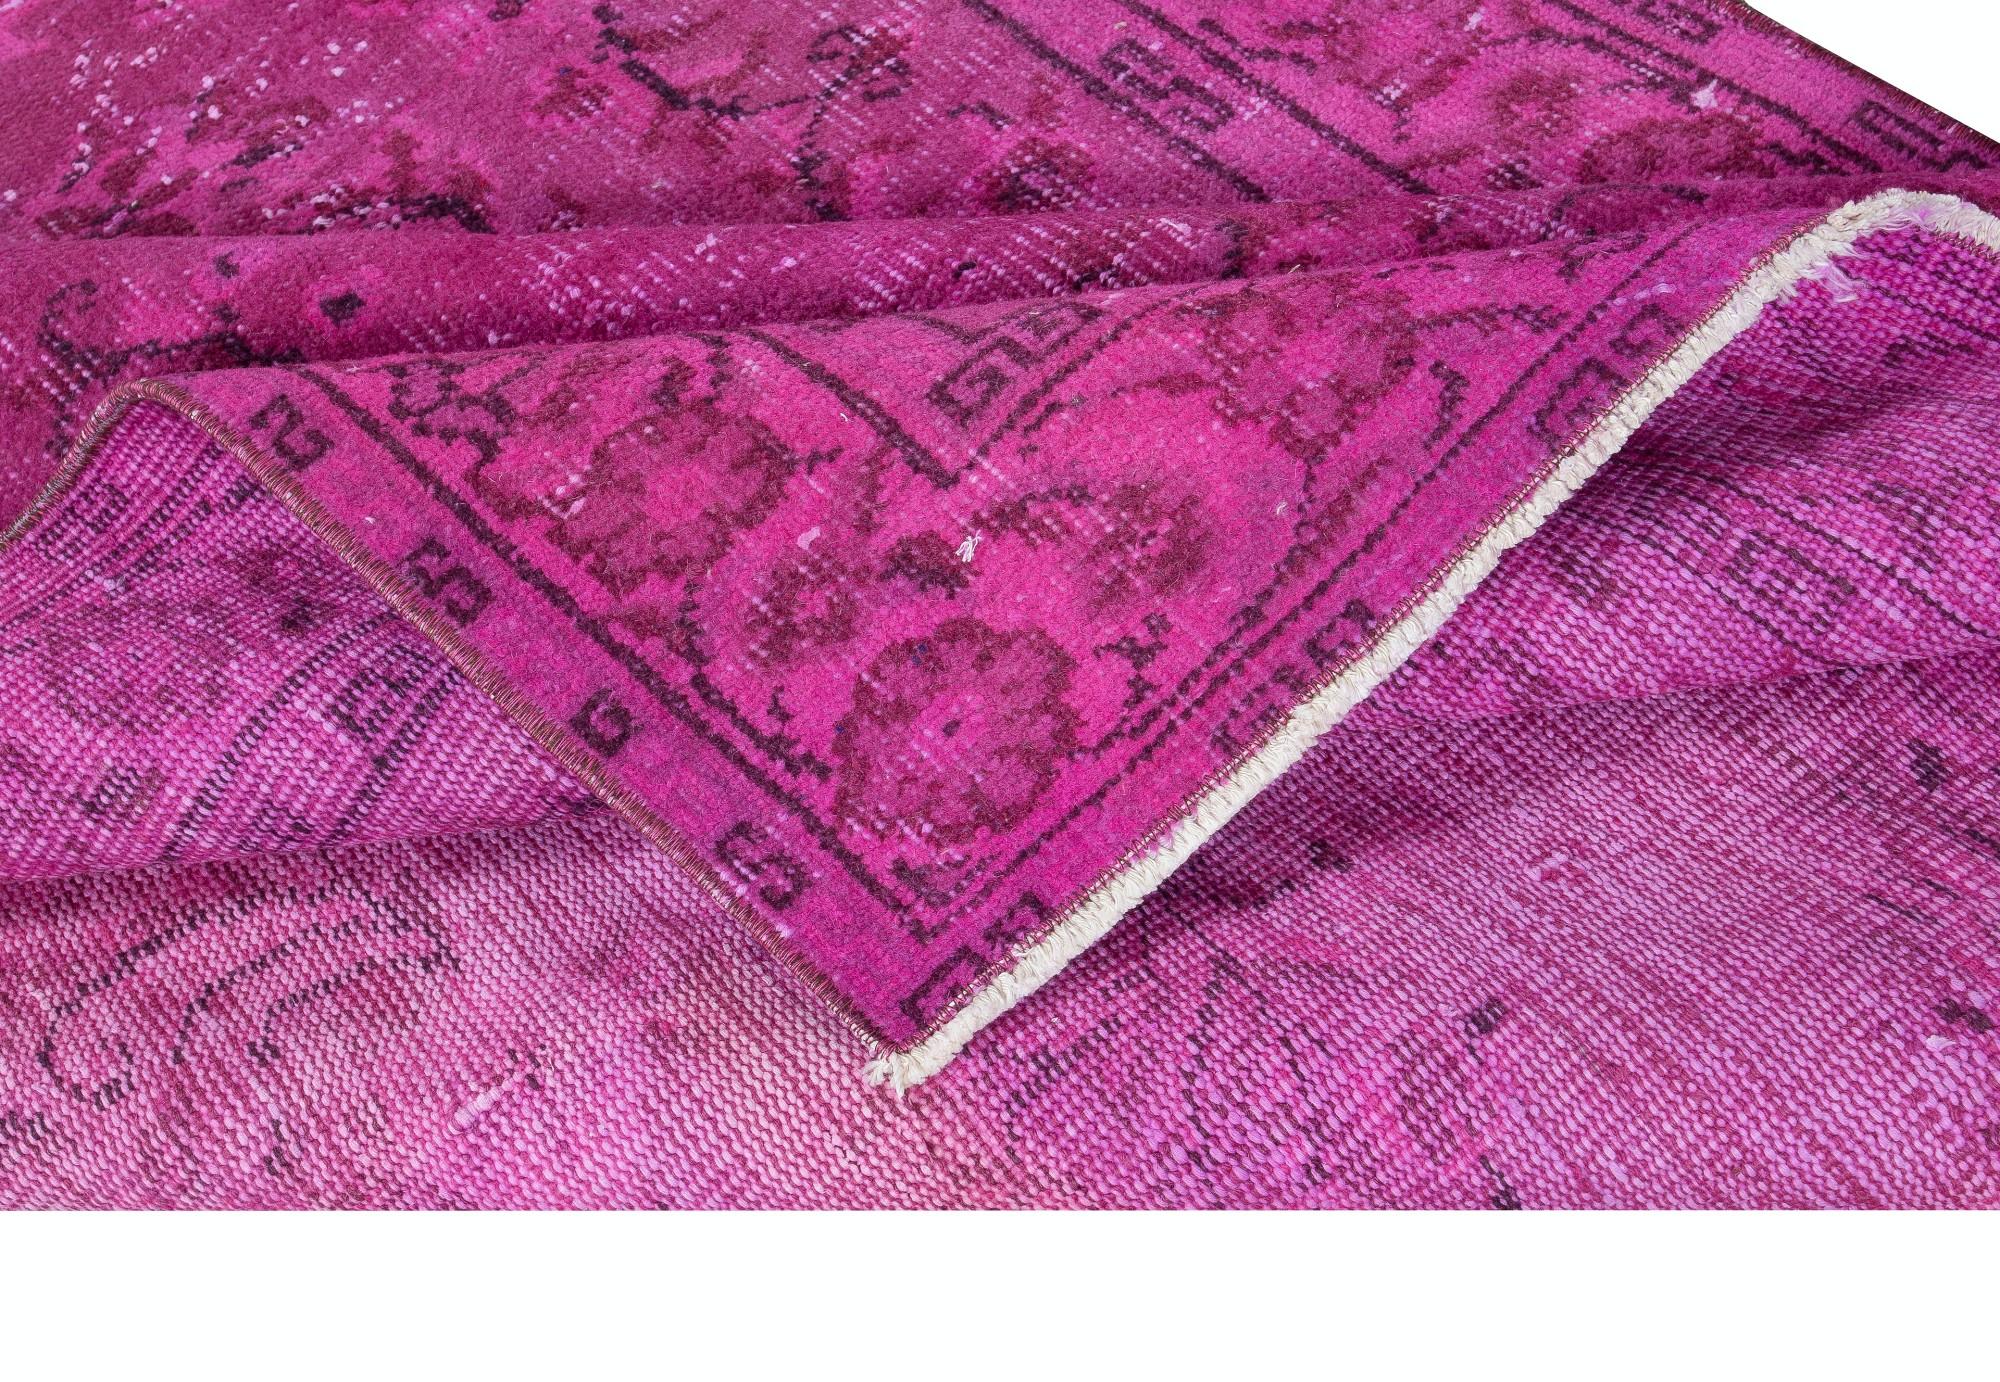 Modern 4.5x7.8 Ft Contemporary Pink Area Rug, Handmade Turkish Carpet, Floor Covering For Sale